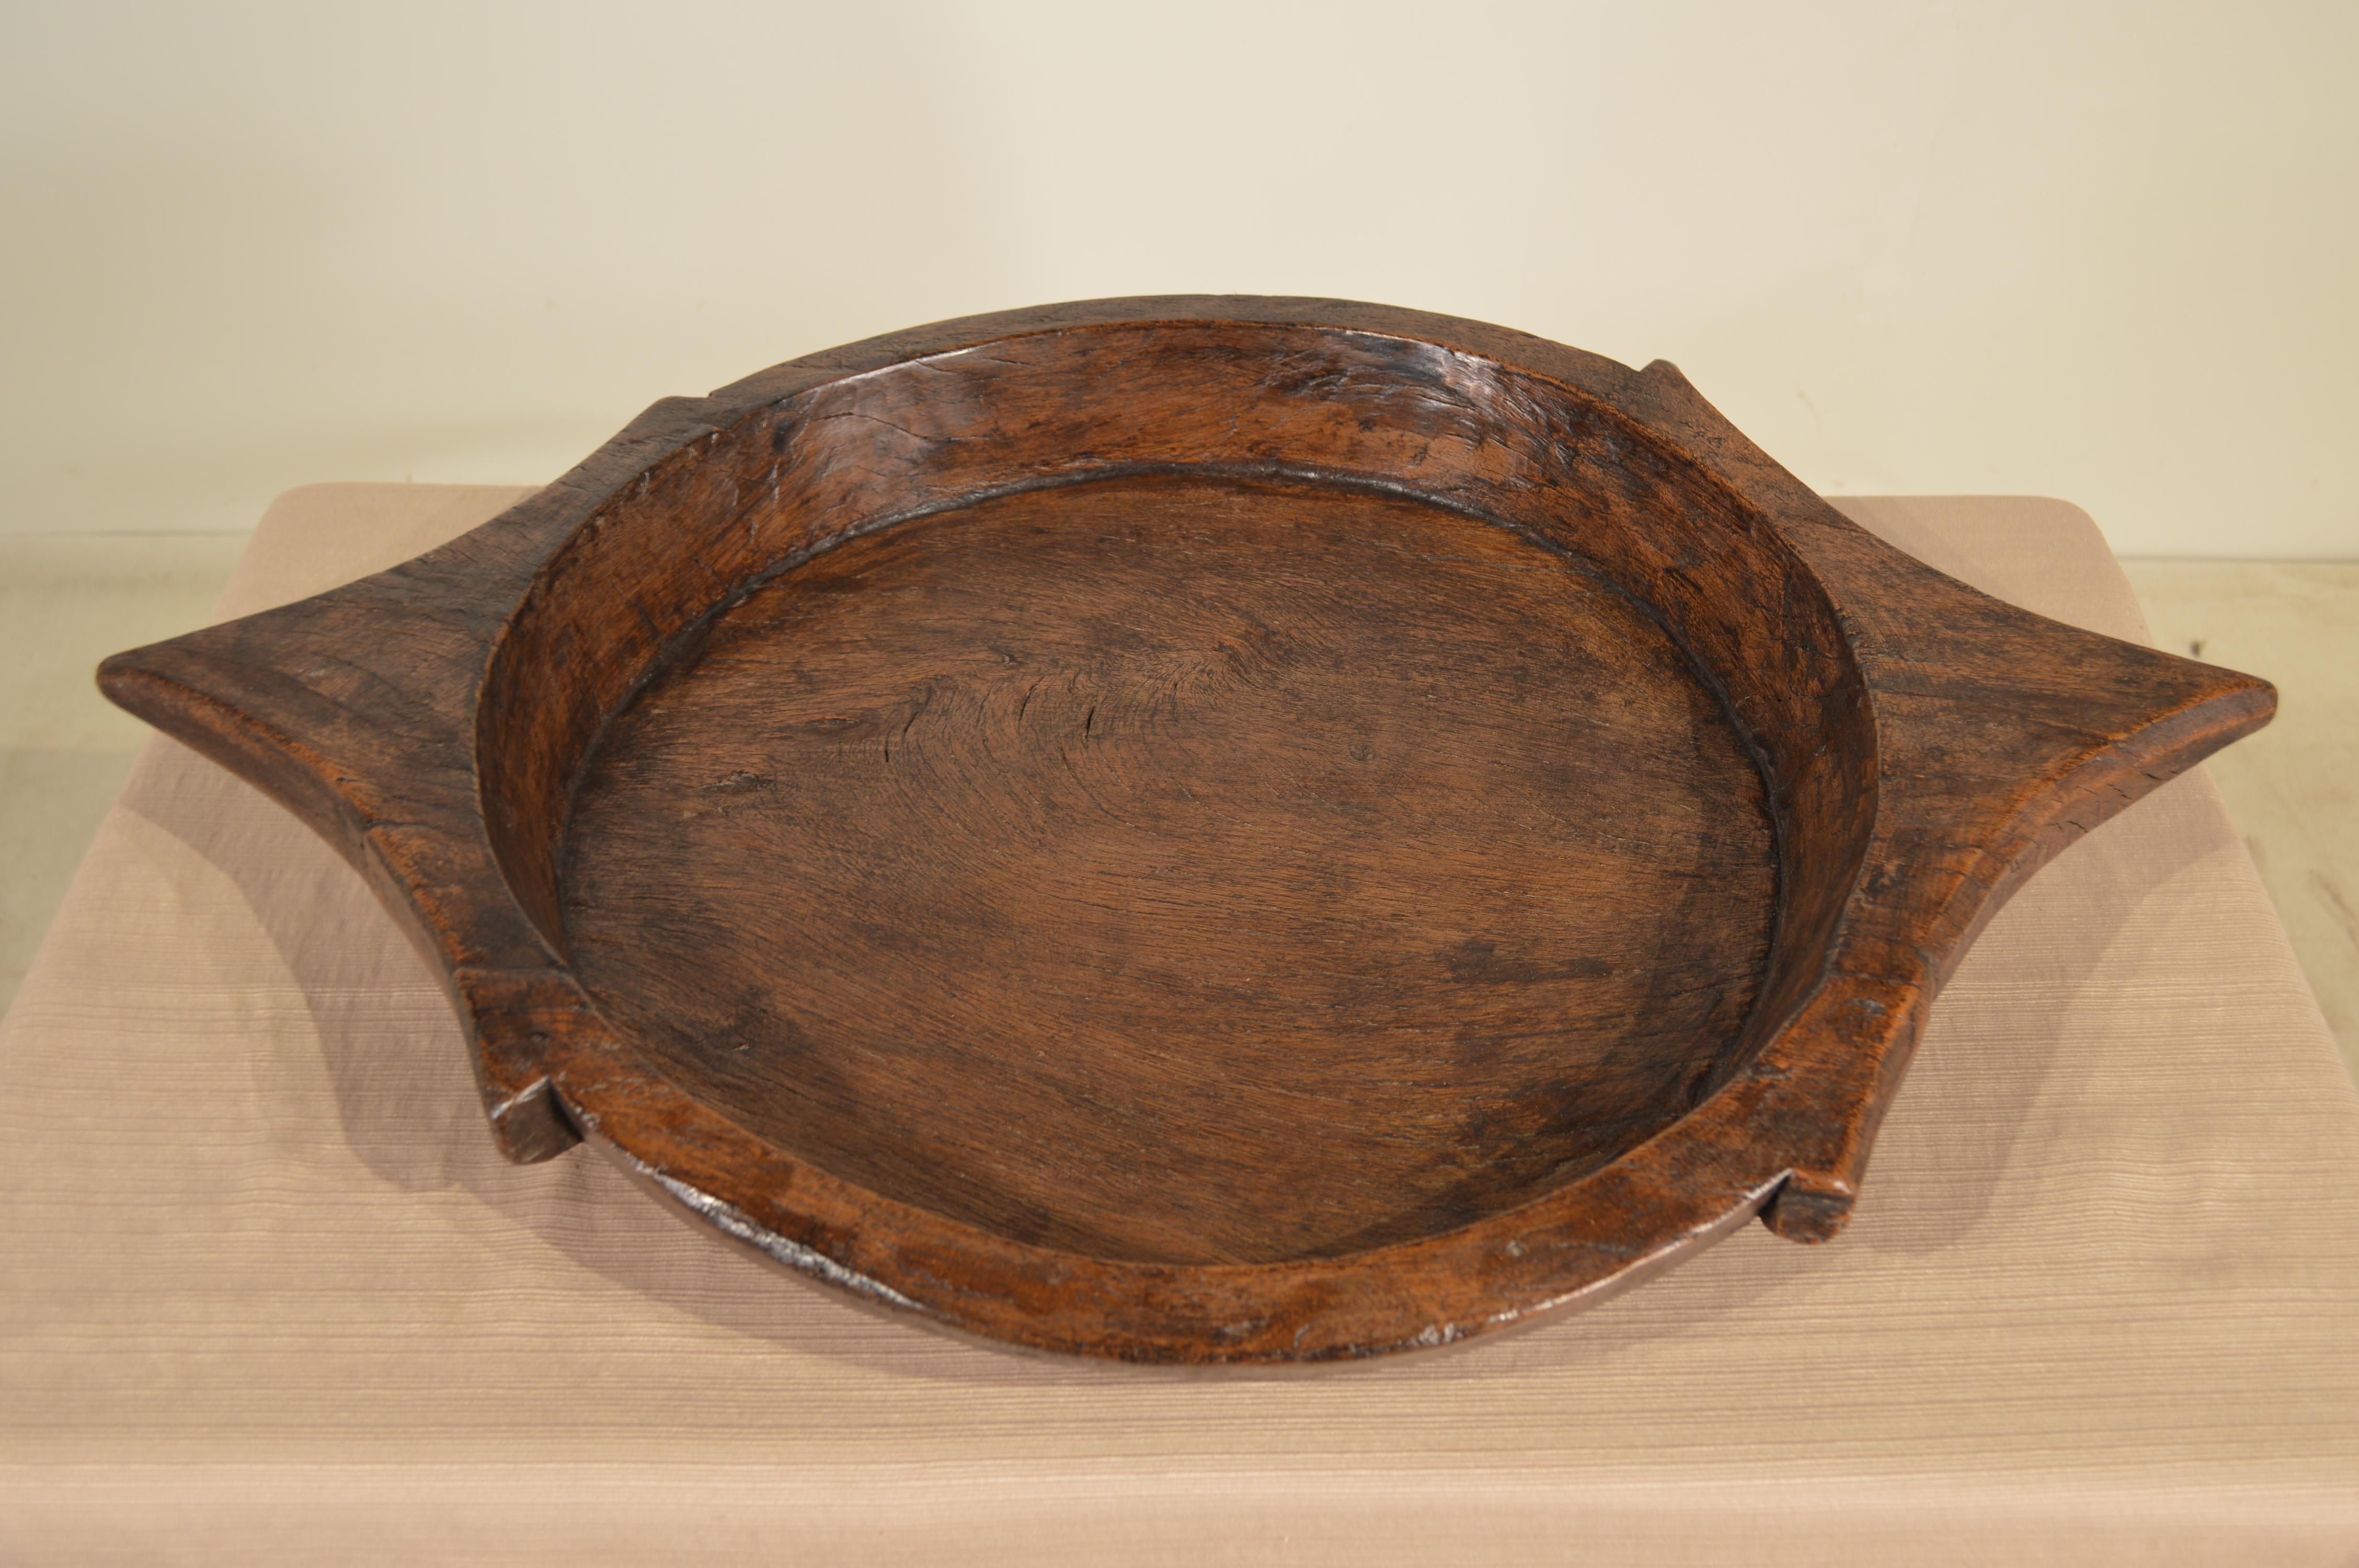 19th Century hand-hewn wooden bowl made from fruitwood with primitive style handles.